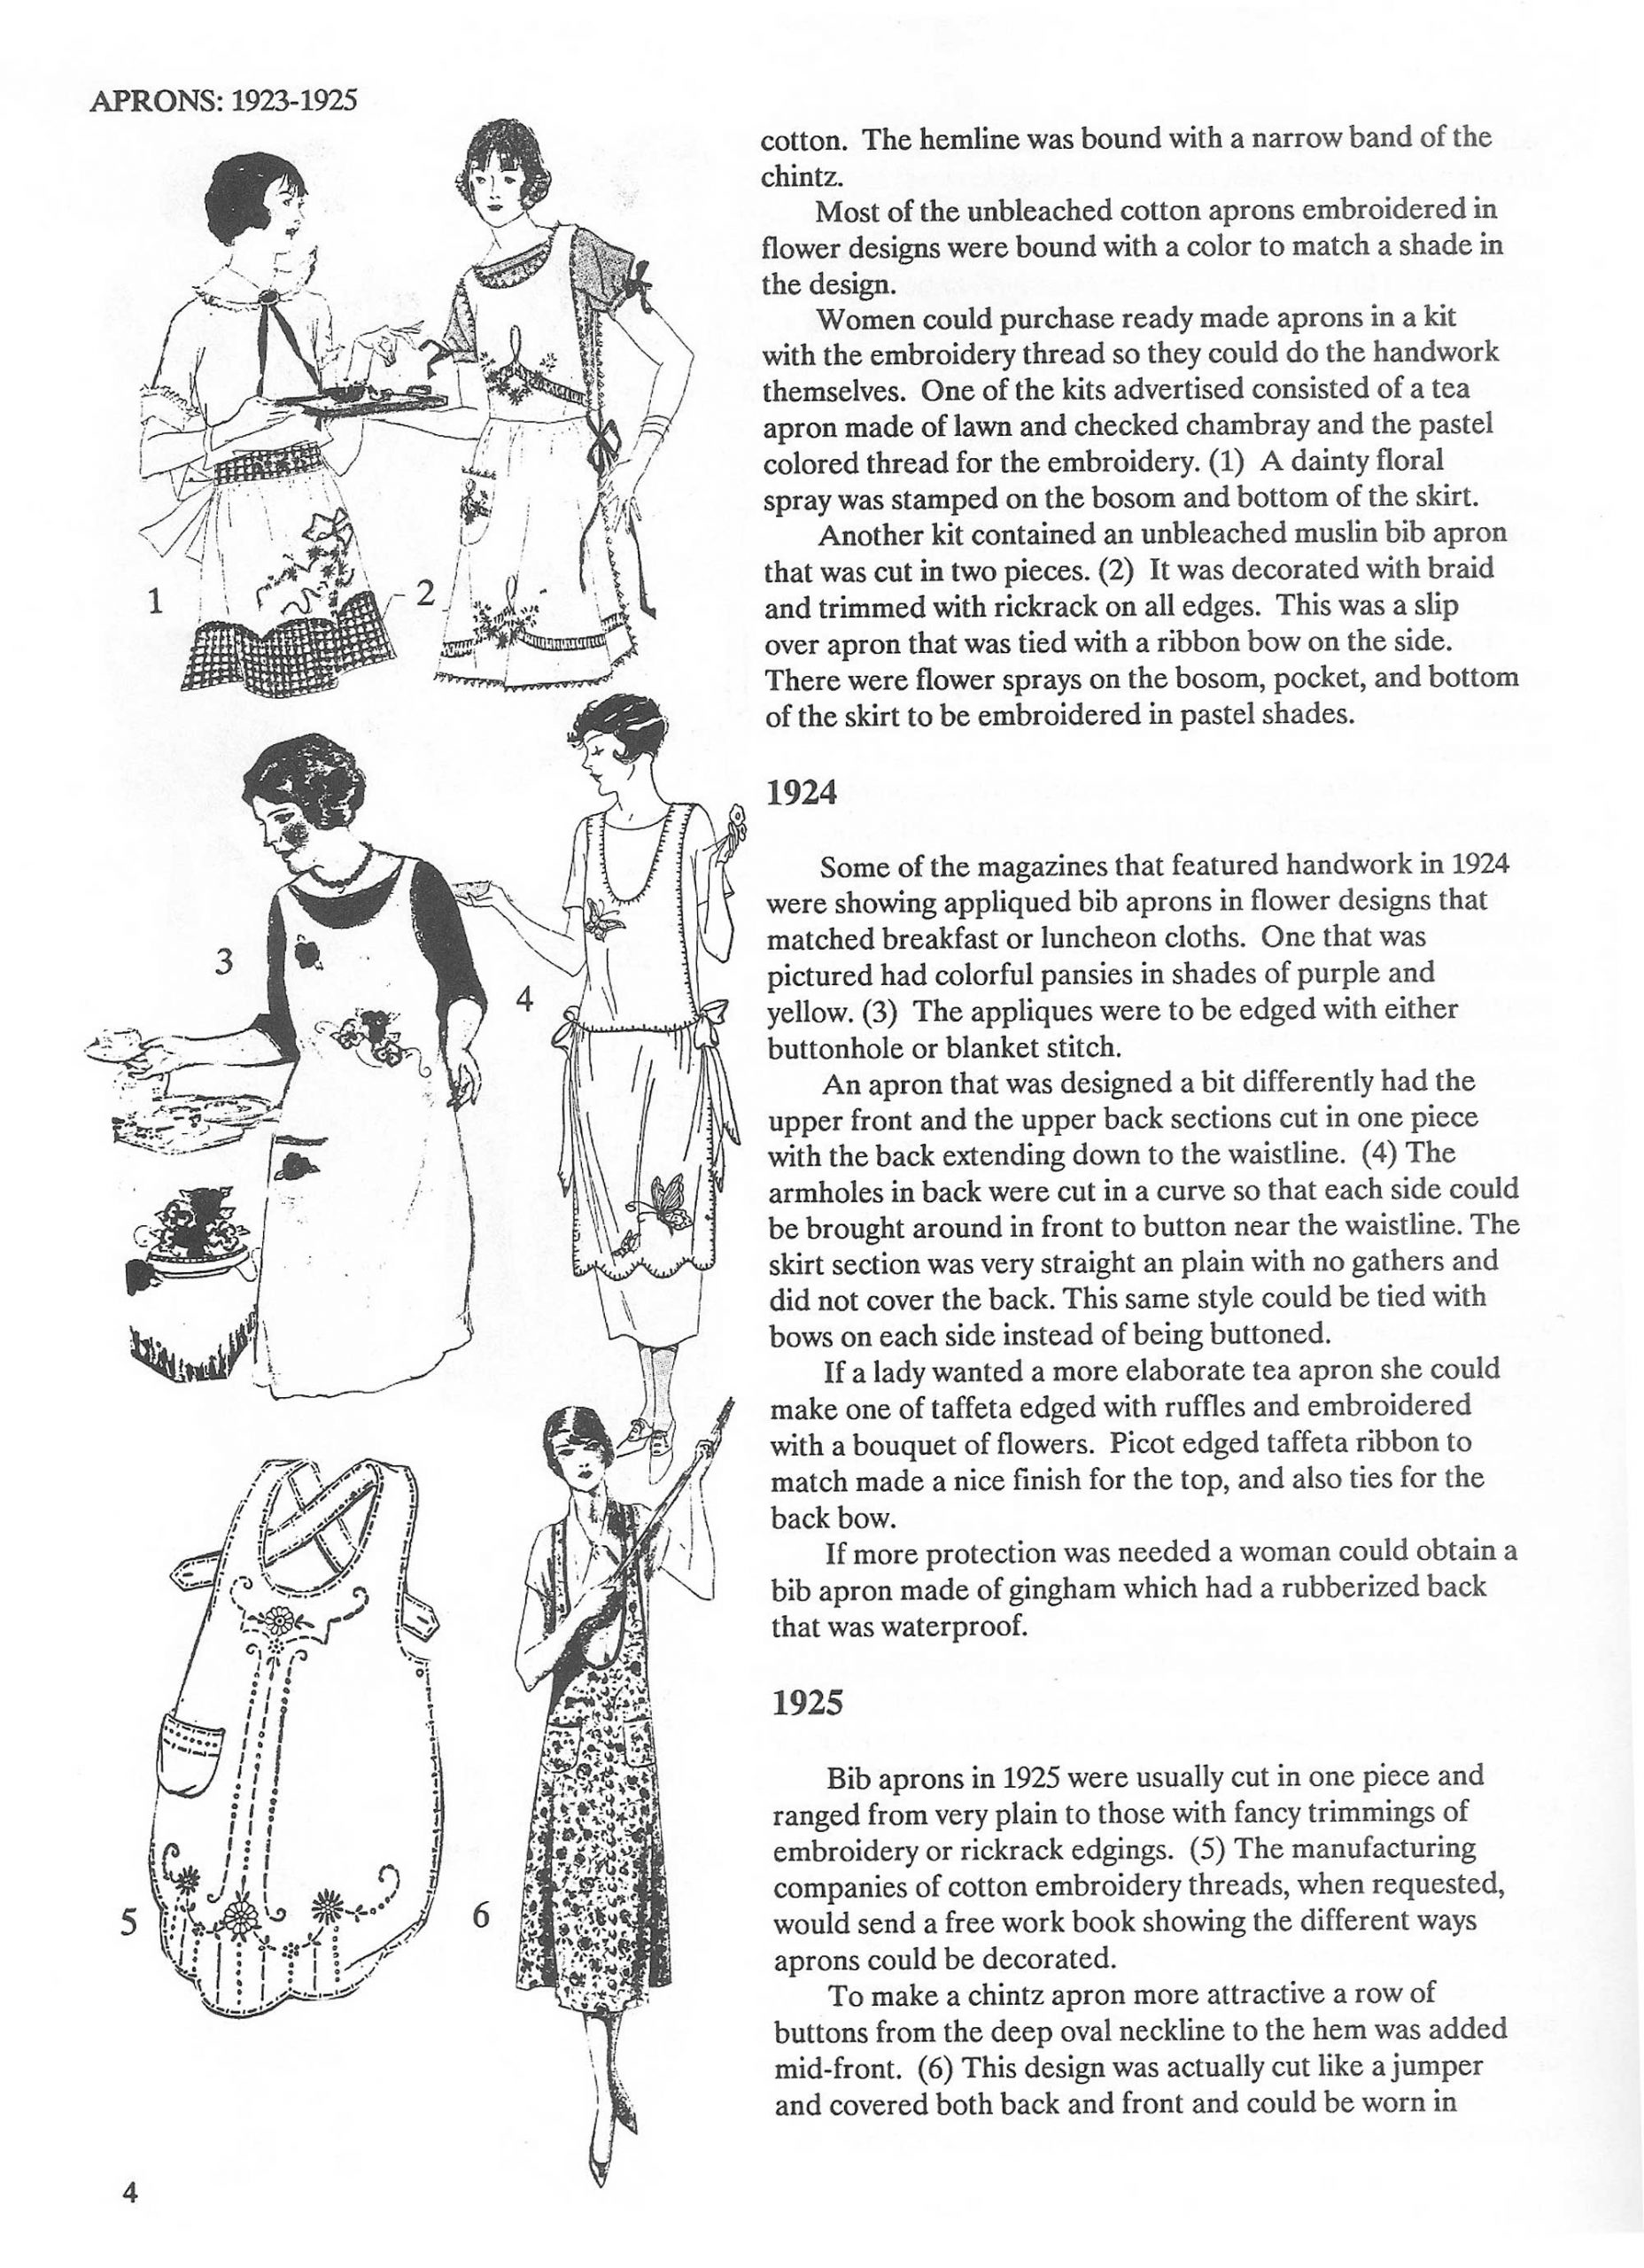 1920s Women's Fashion Reference Book - The Roaring 20s